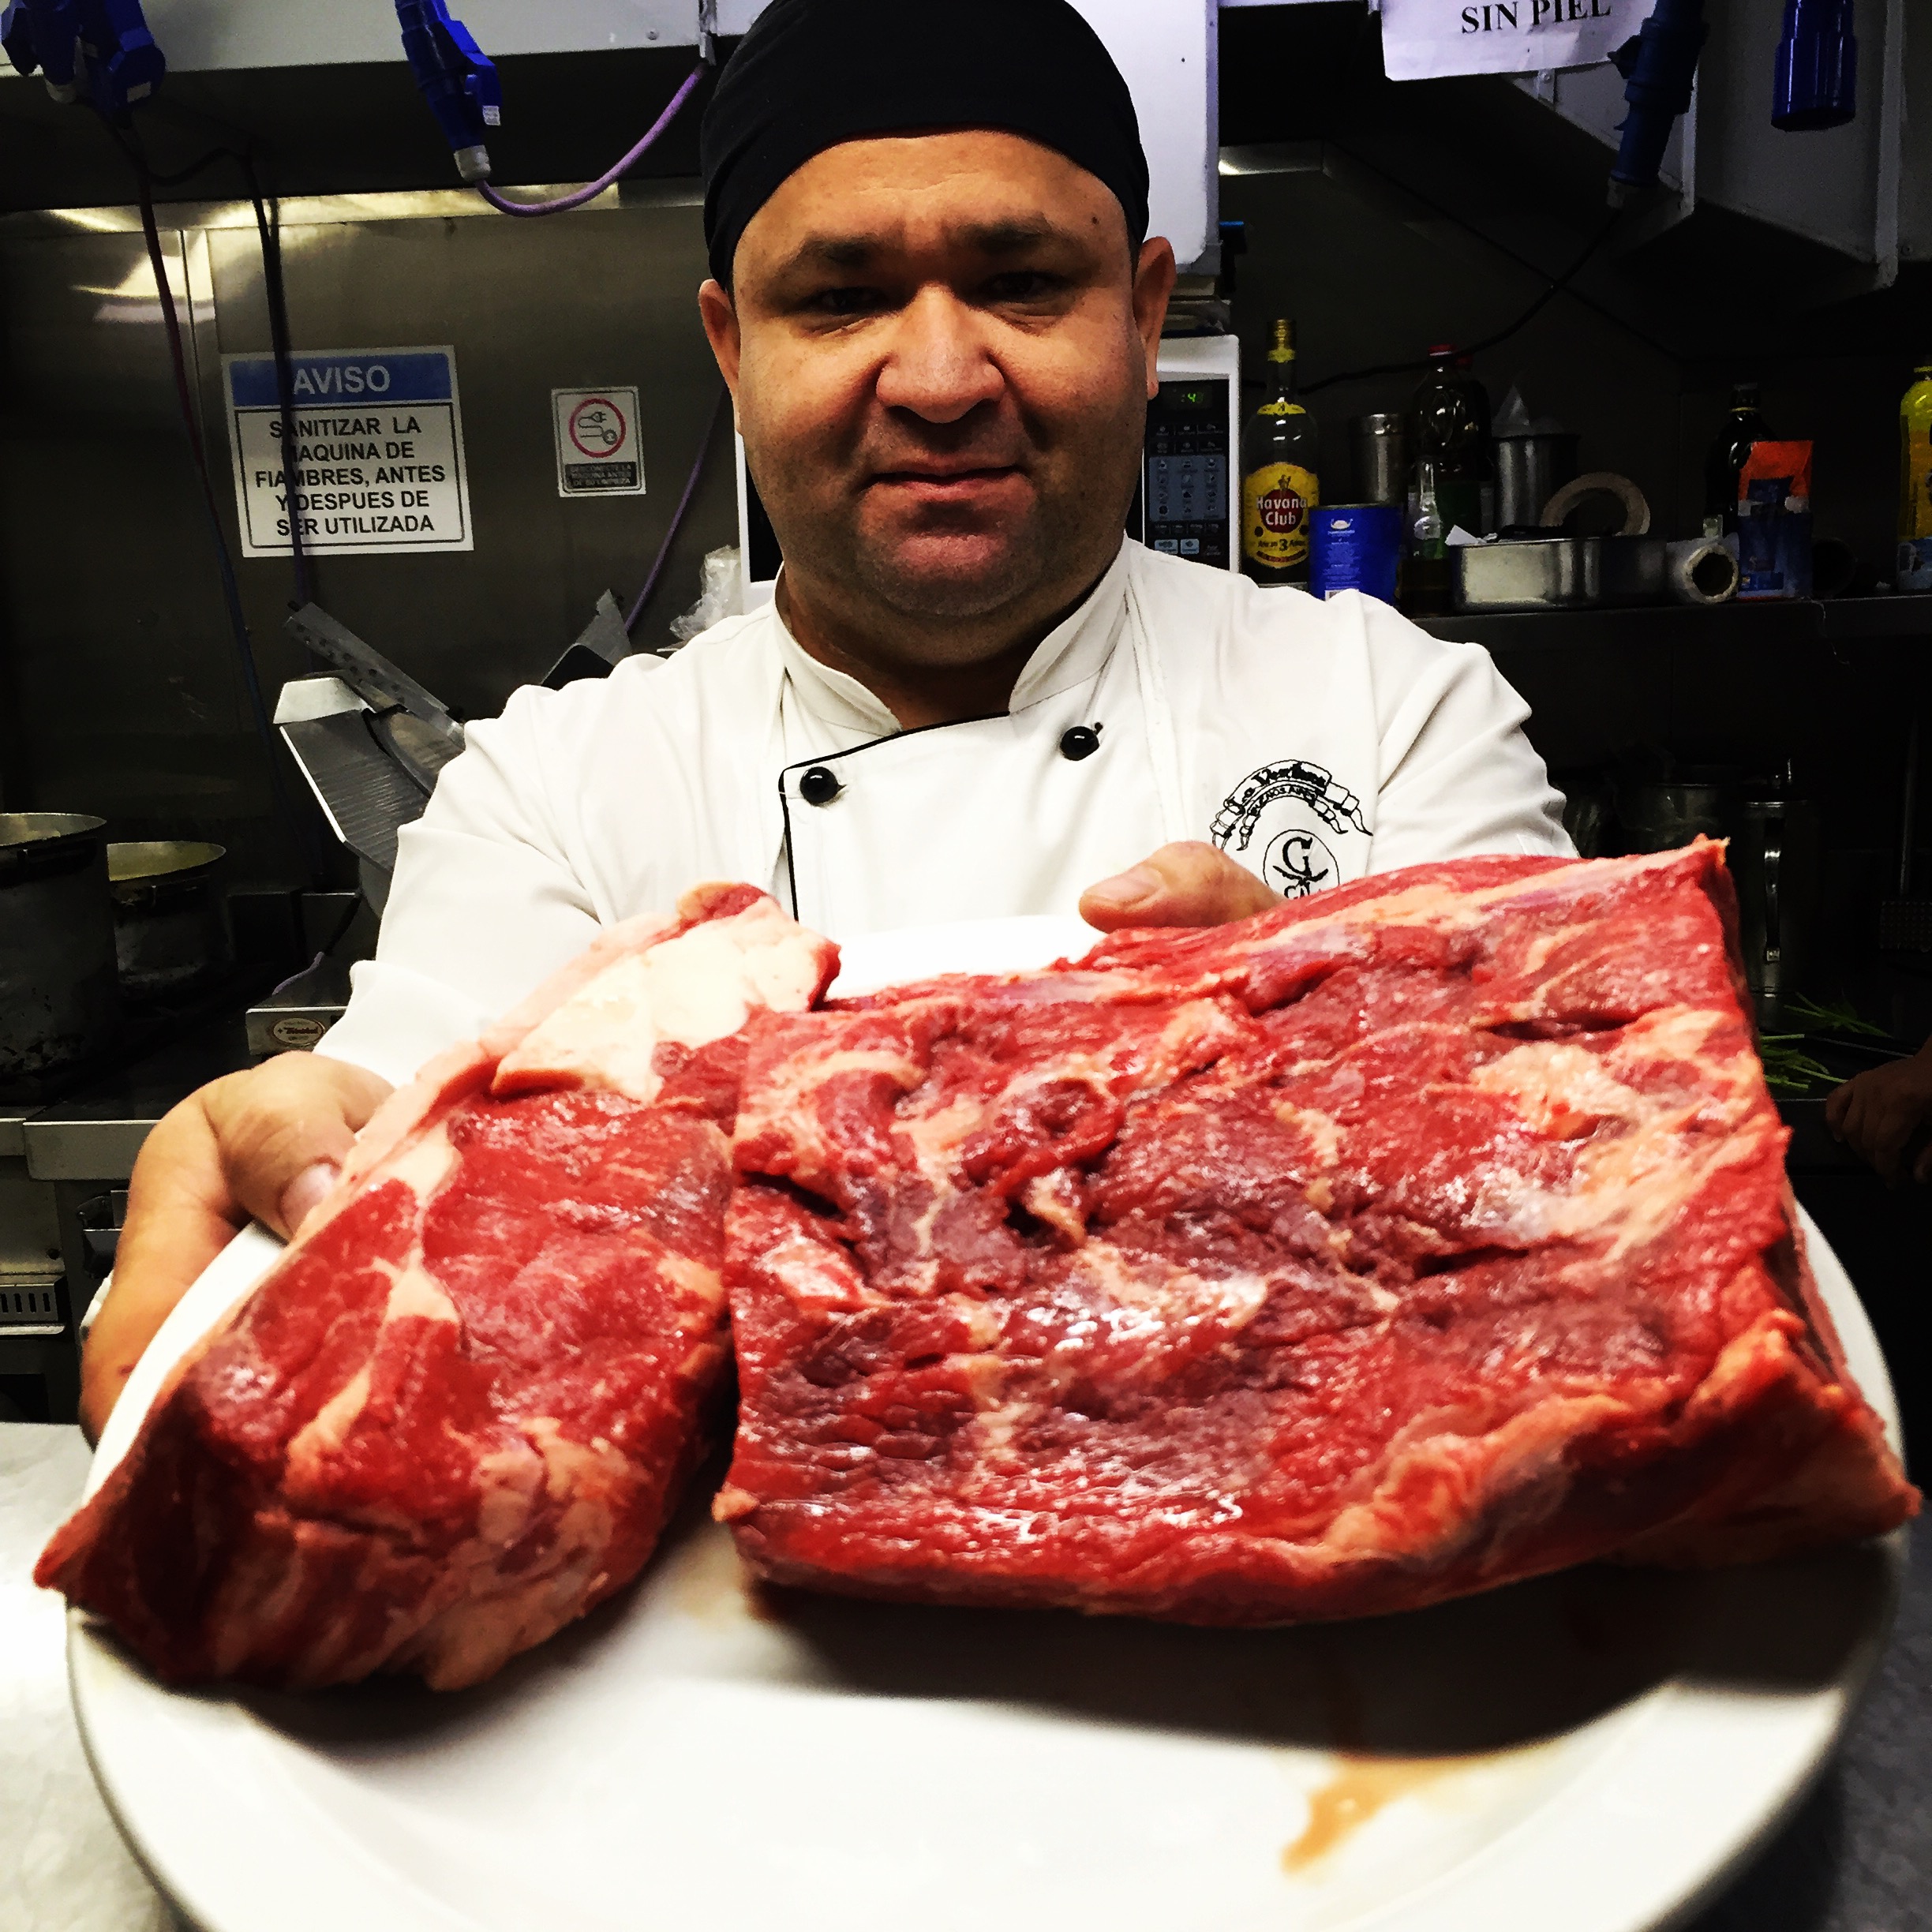 A chef holds up the steak destined for cooking 